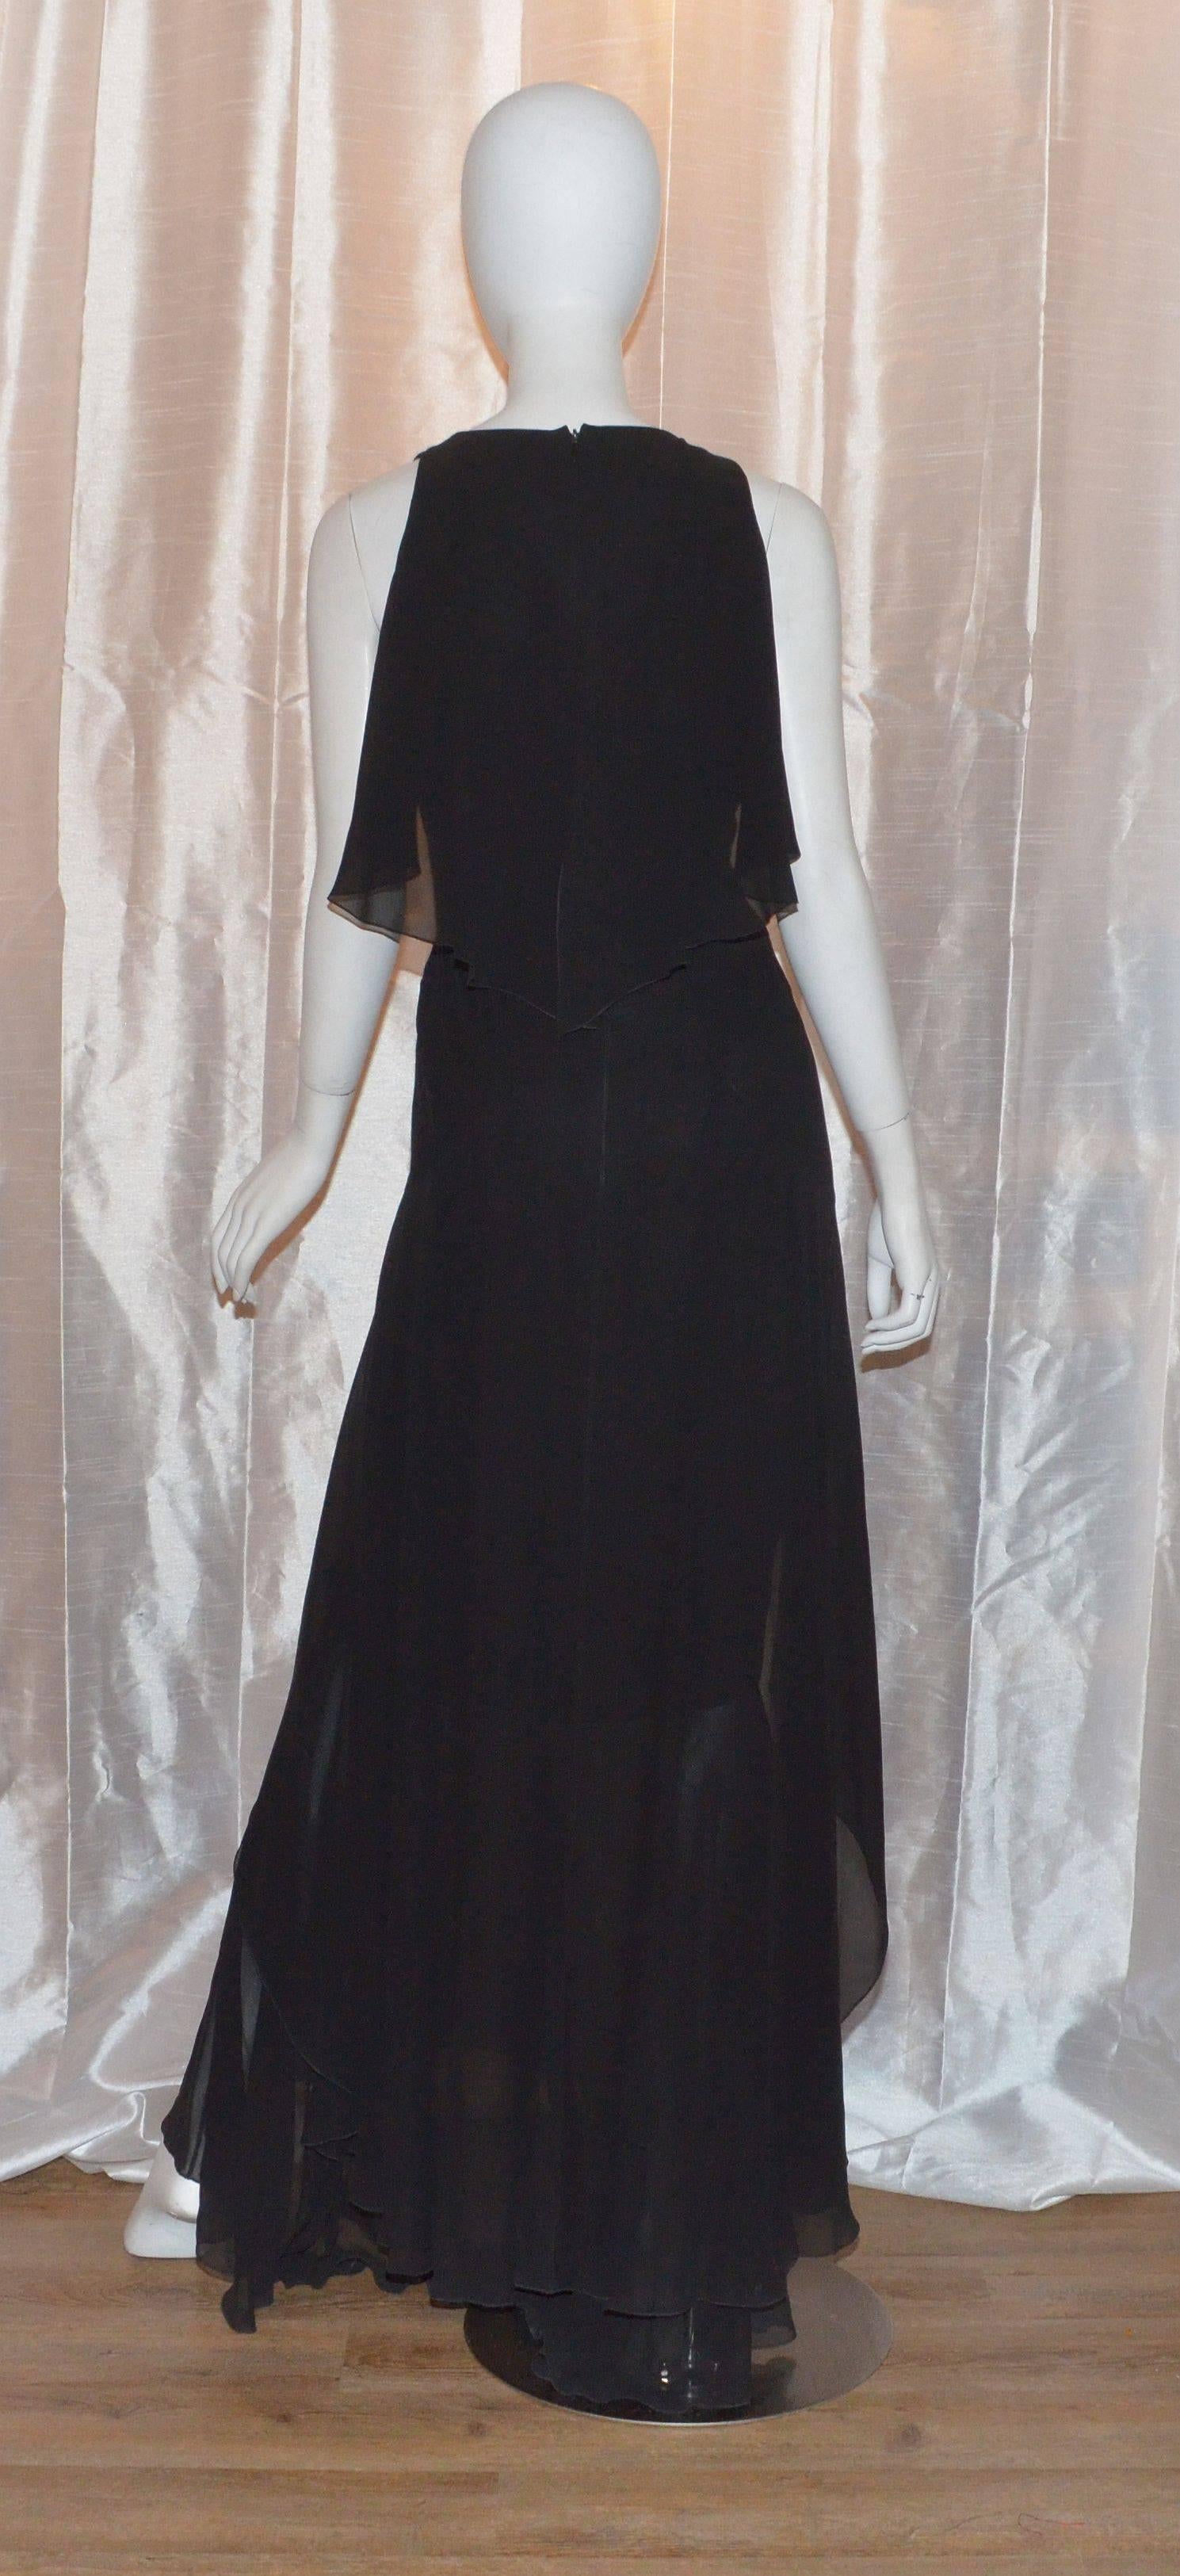 Chanel silk chiffon gown from 2006 Fall collection is a size 40. Dress is 100% silk with a V-neckline, front of the dress creates the illusion of a tulip-hem lining, silk ruffle layering at the bust that follows to the back and layering on the low